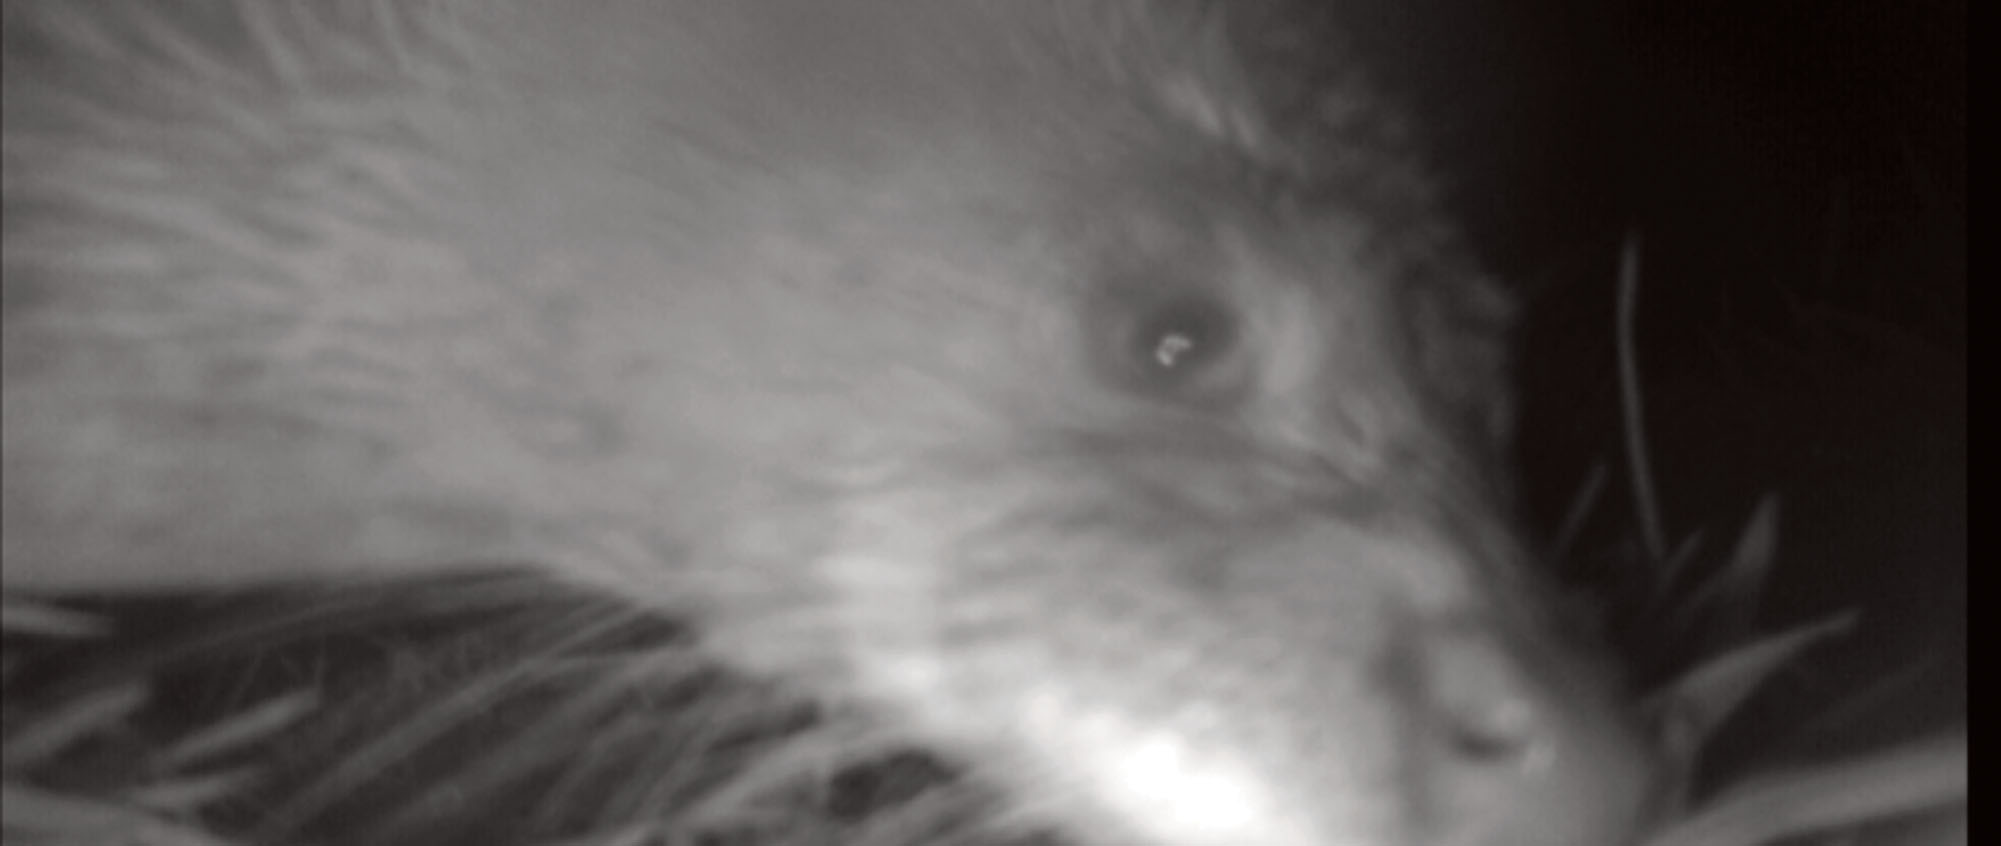 Still image from a camera trap showing an otter